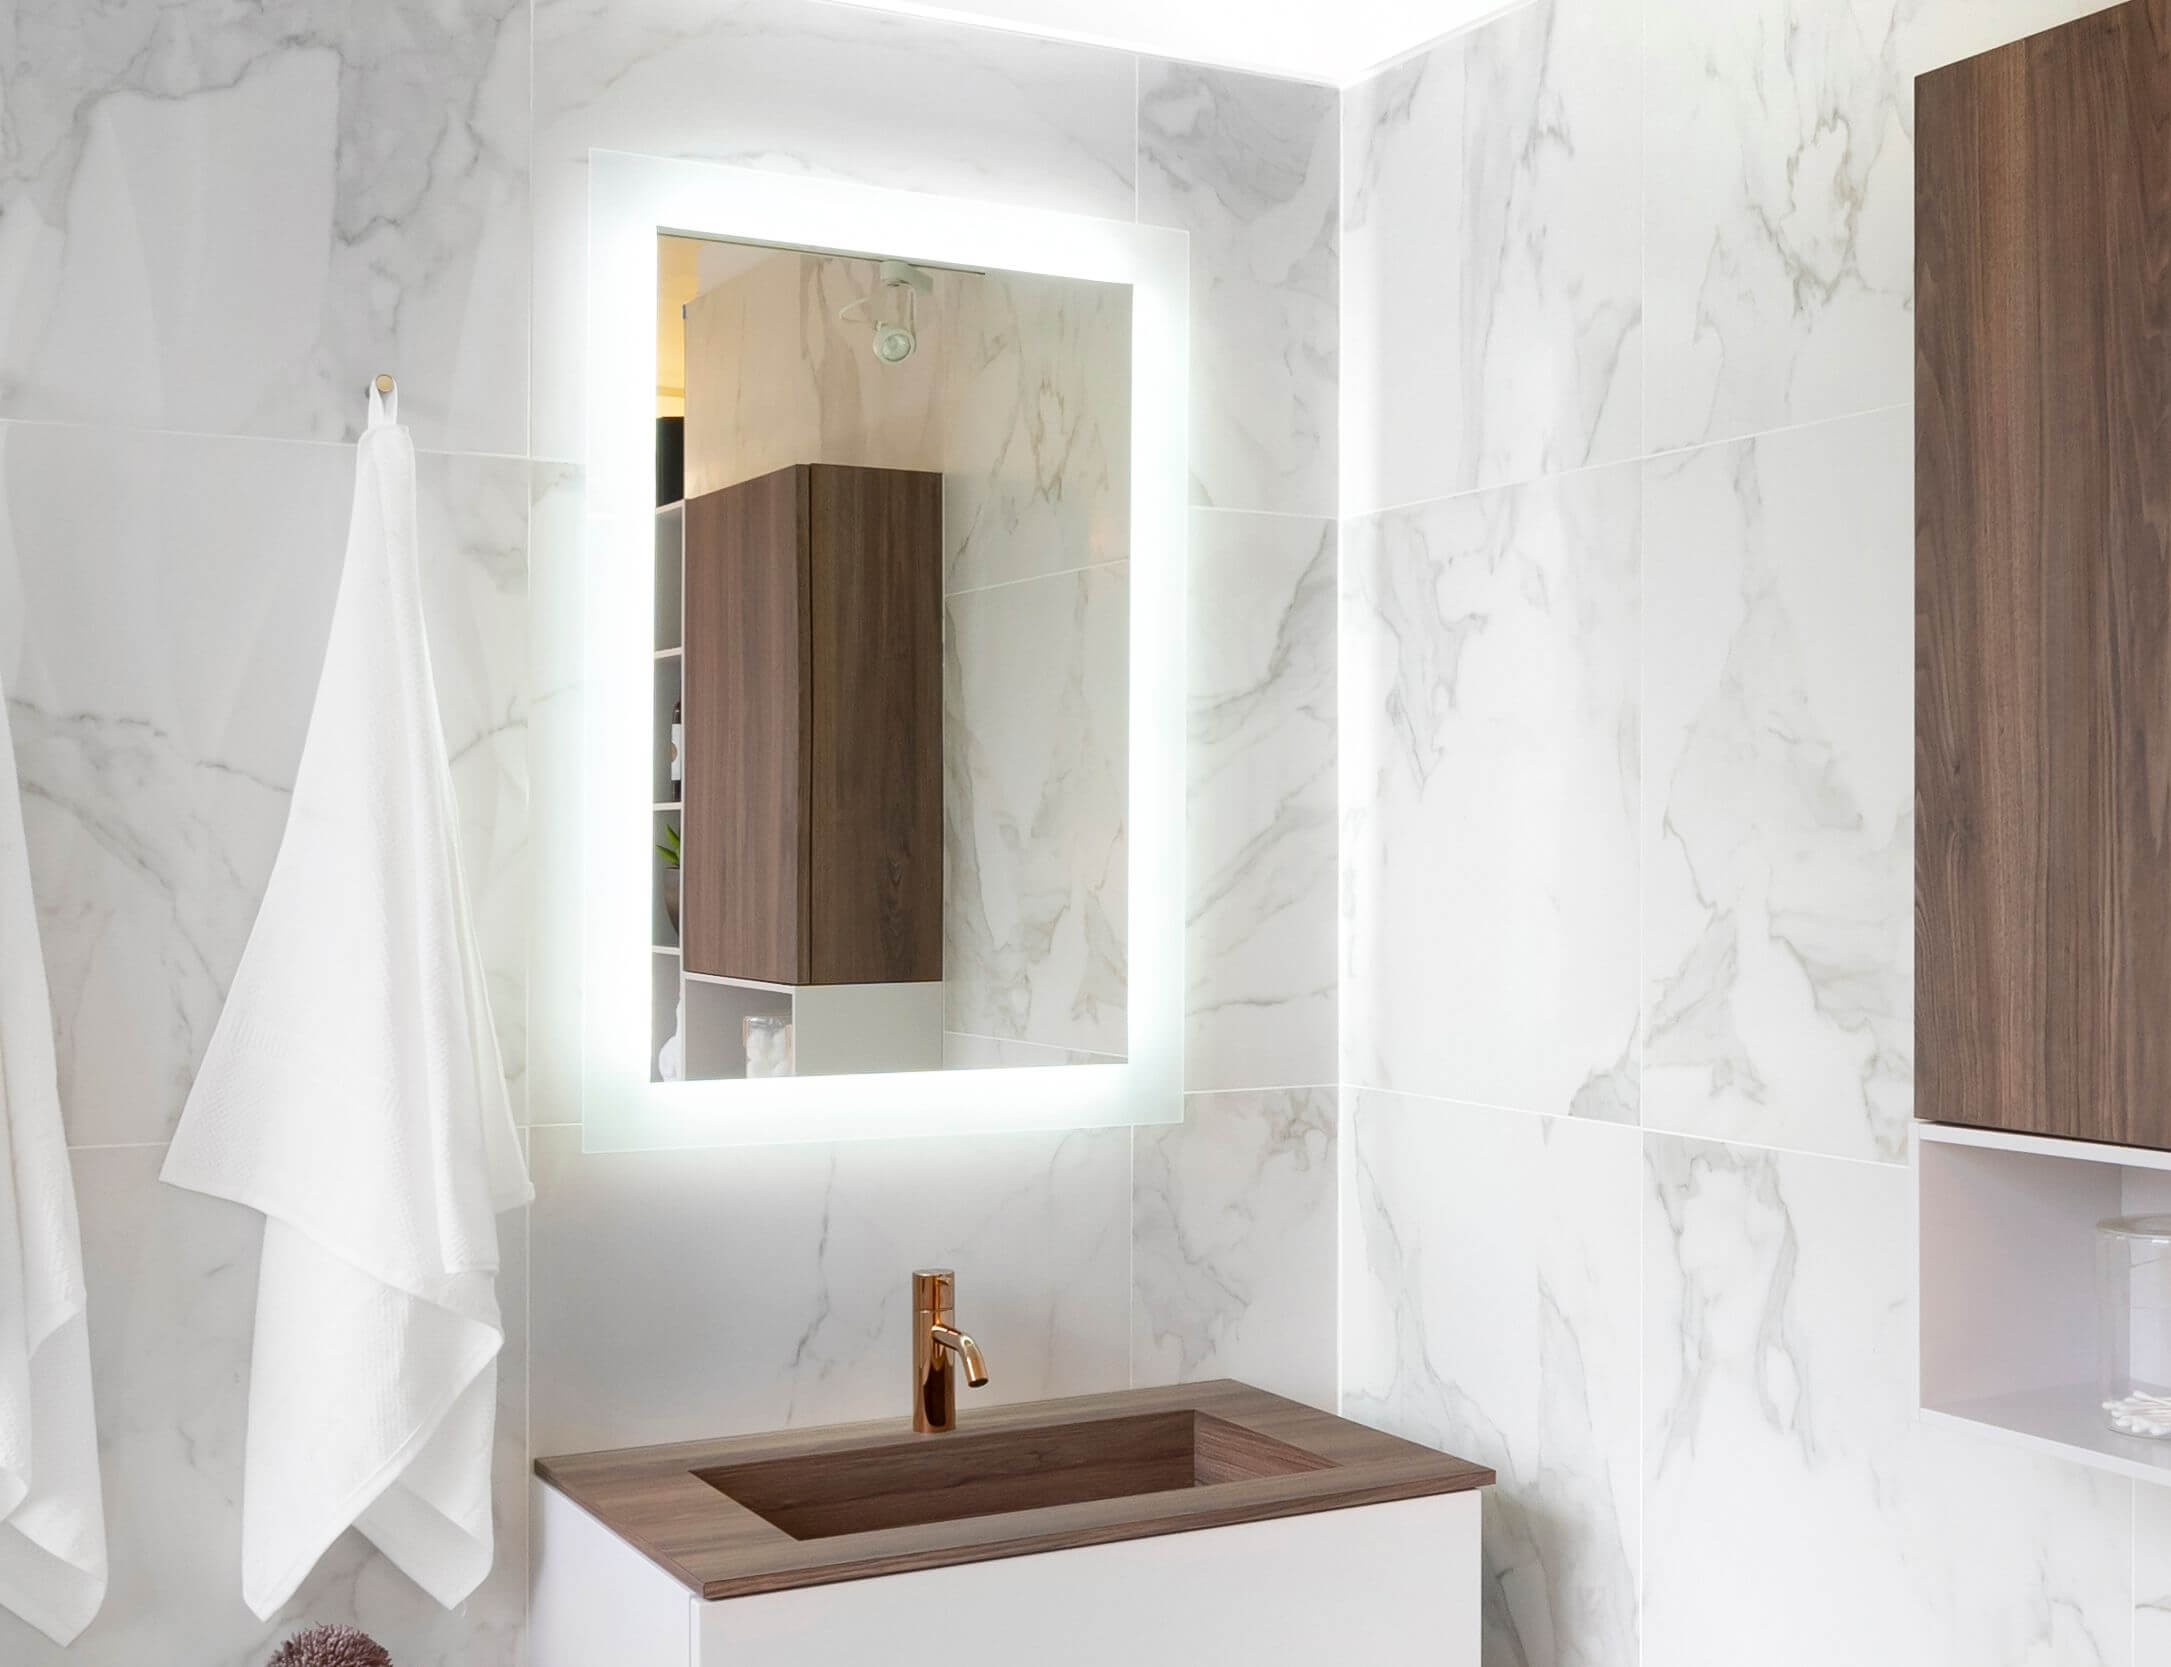 Bathroom Lighting 101: Bring your personal spaces to life with the